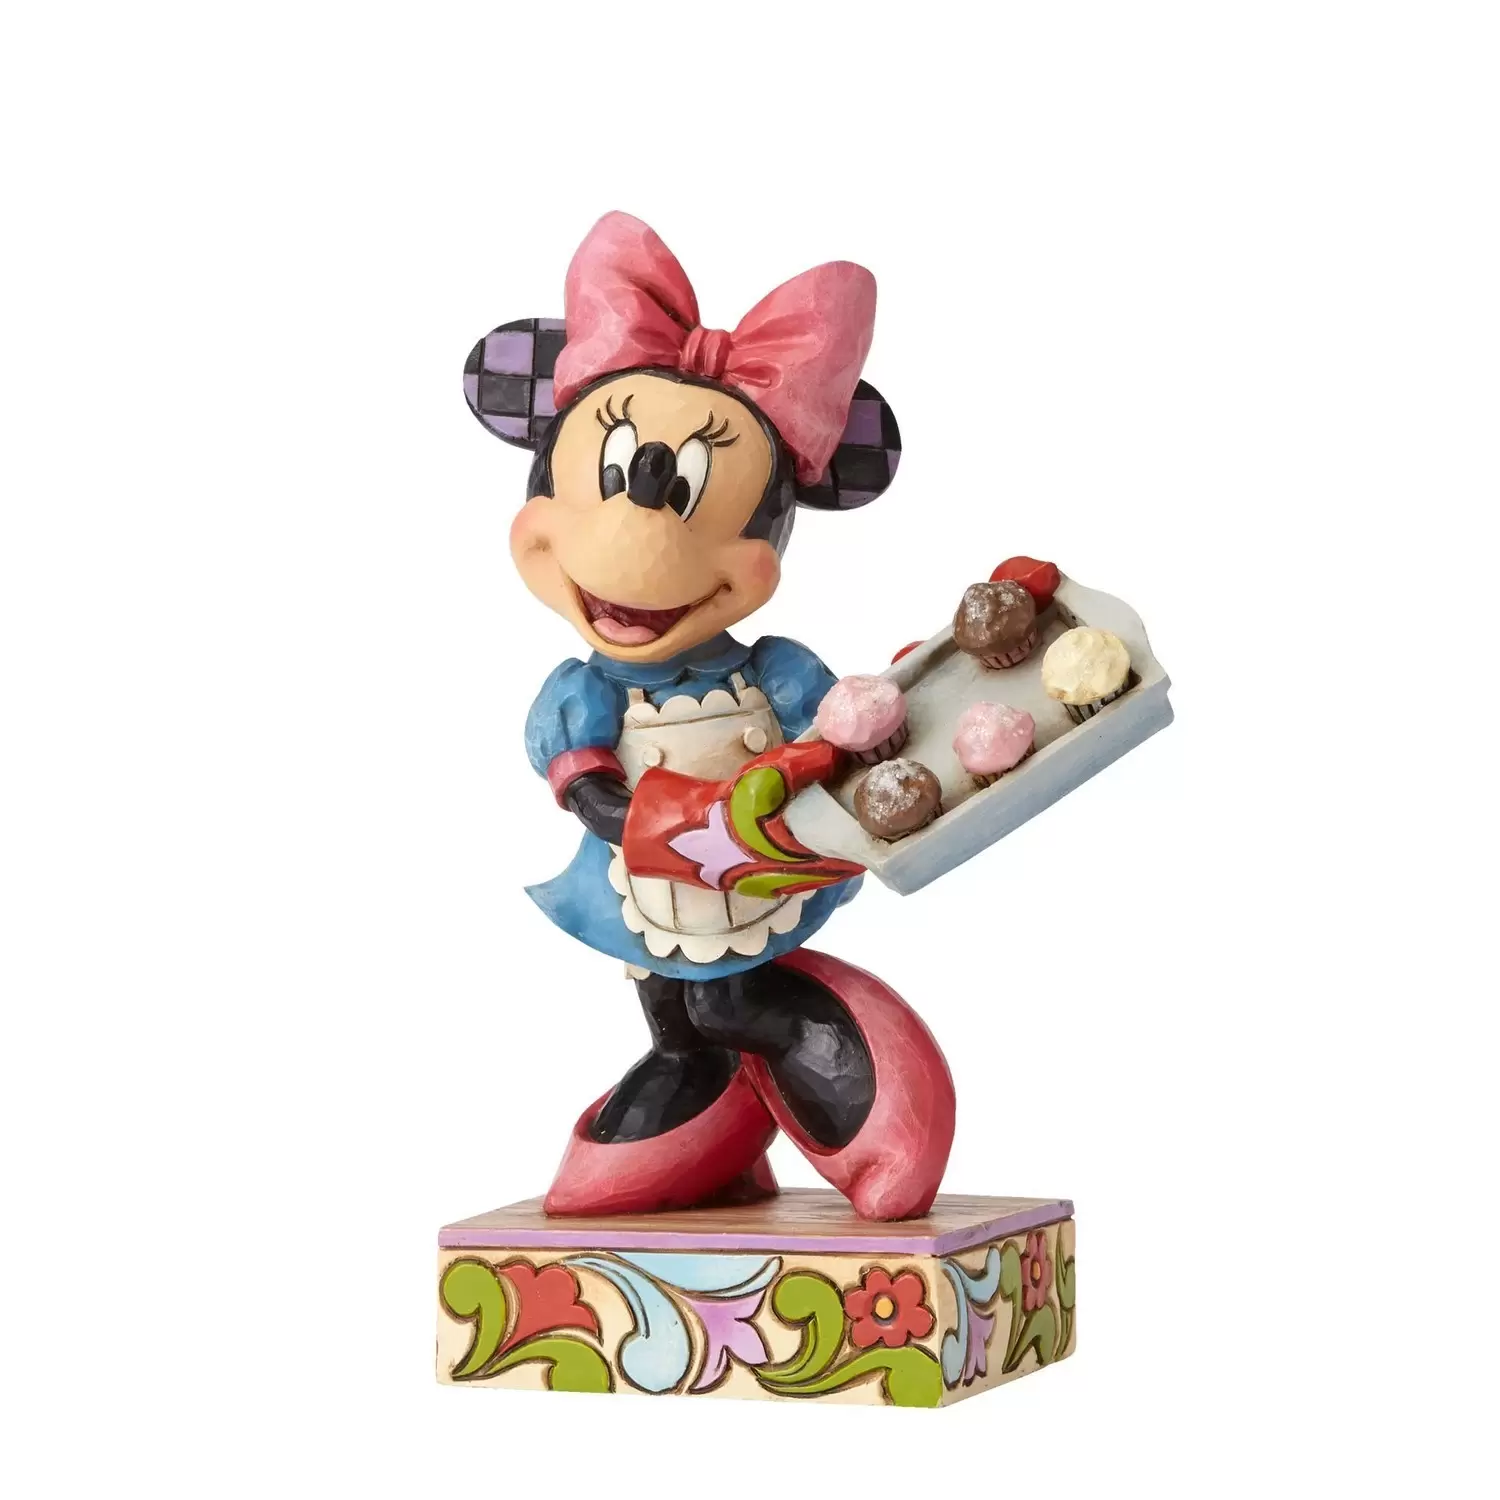 Disney Traditions by Jim Shore - Sugar, Spice and Everything Nice - Baker Minnie